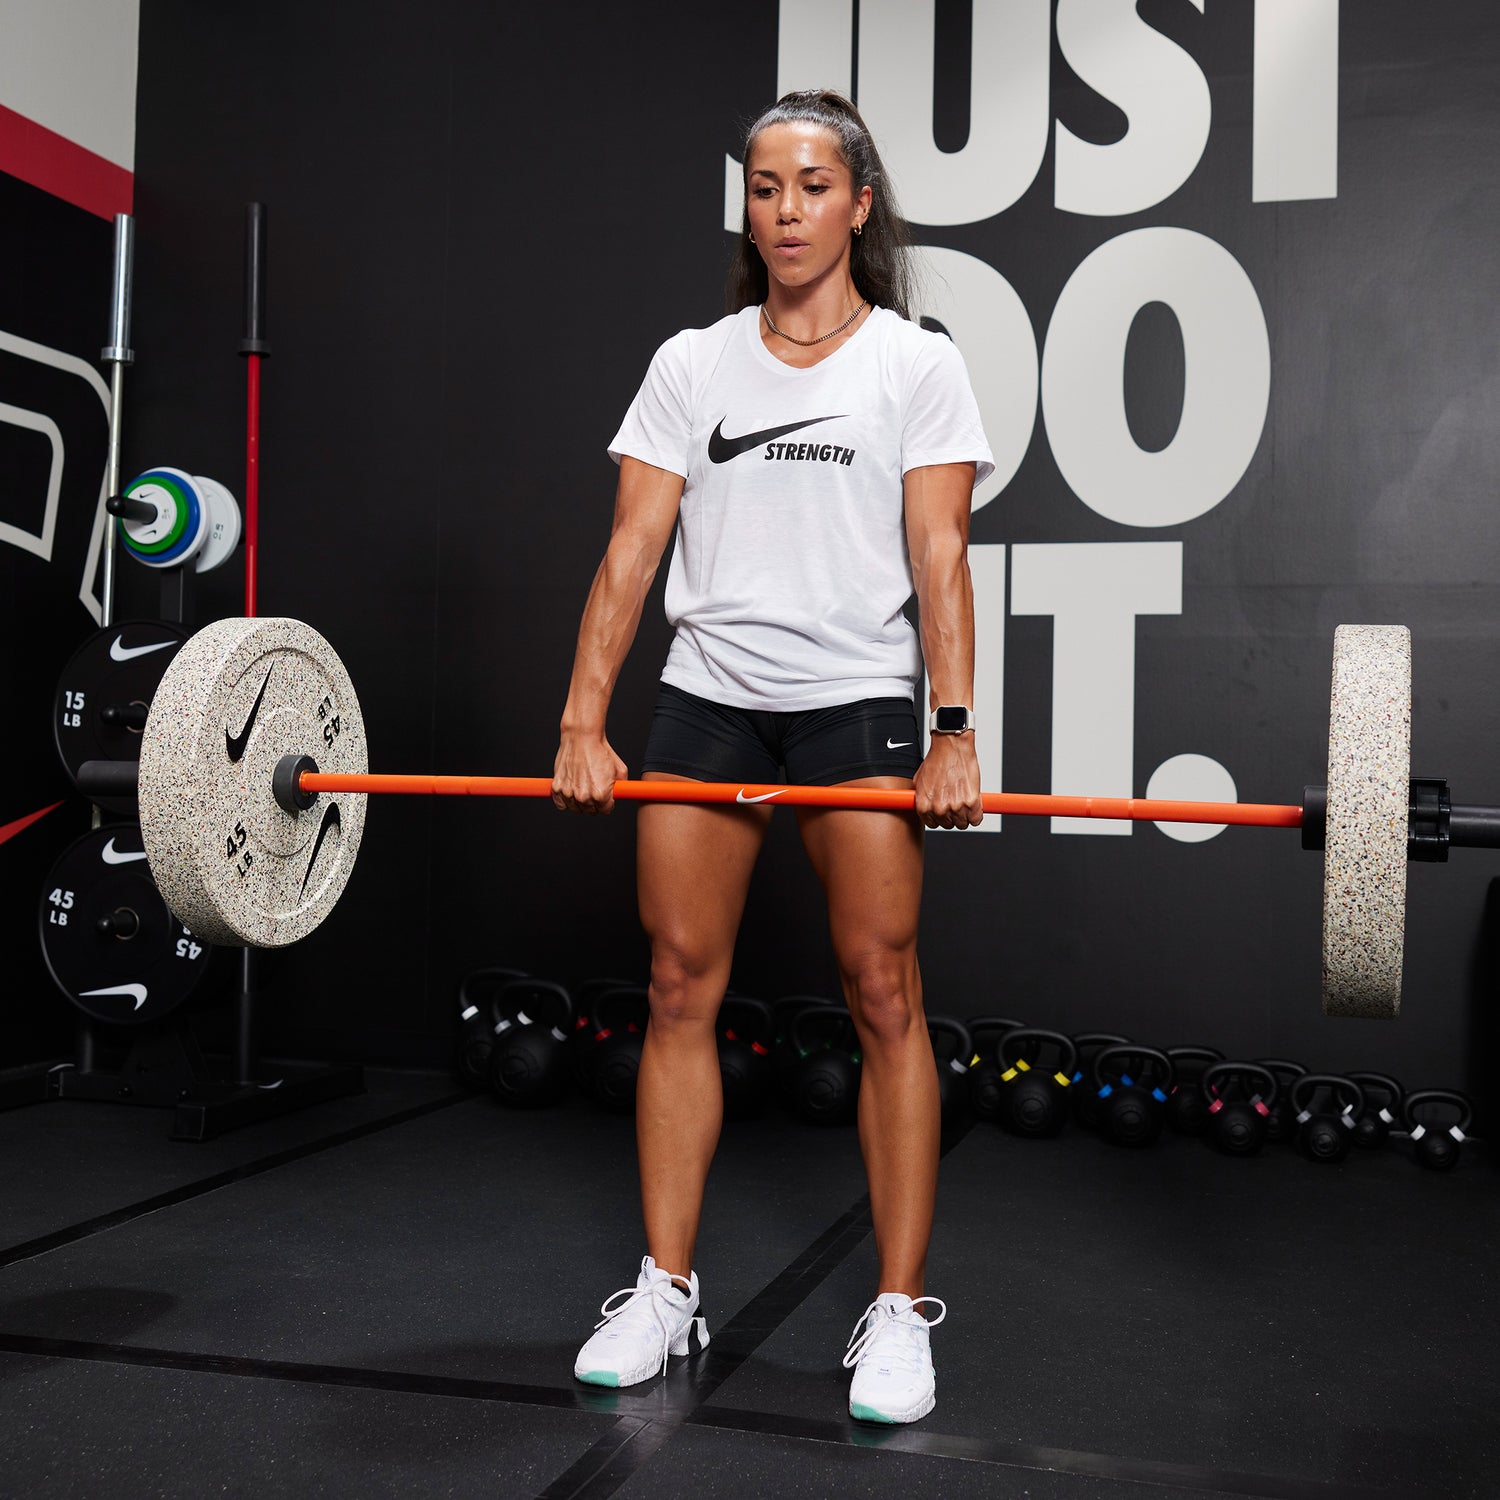 Female athlete deadlifting the Nike coated premium barbell 15kg with Nike Rubber Bumper Plate (Grind) Plates